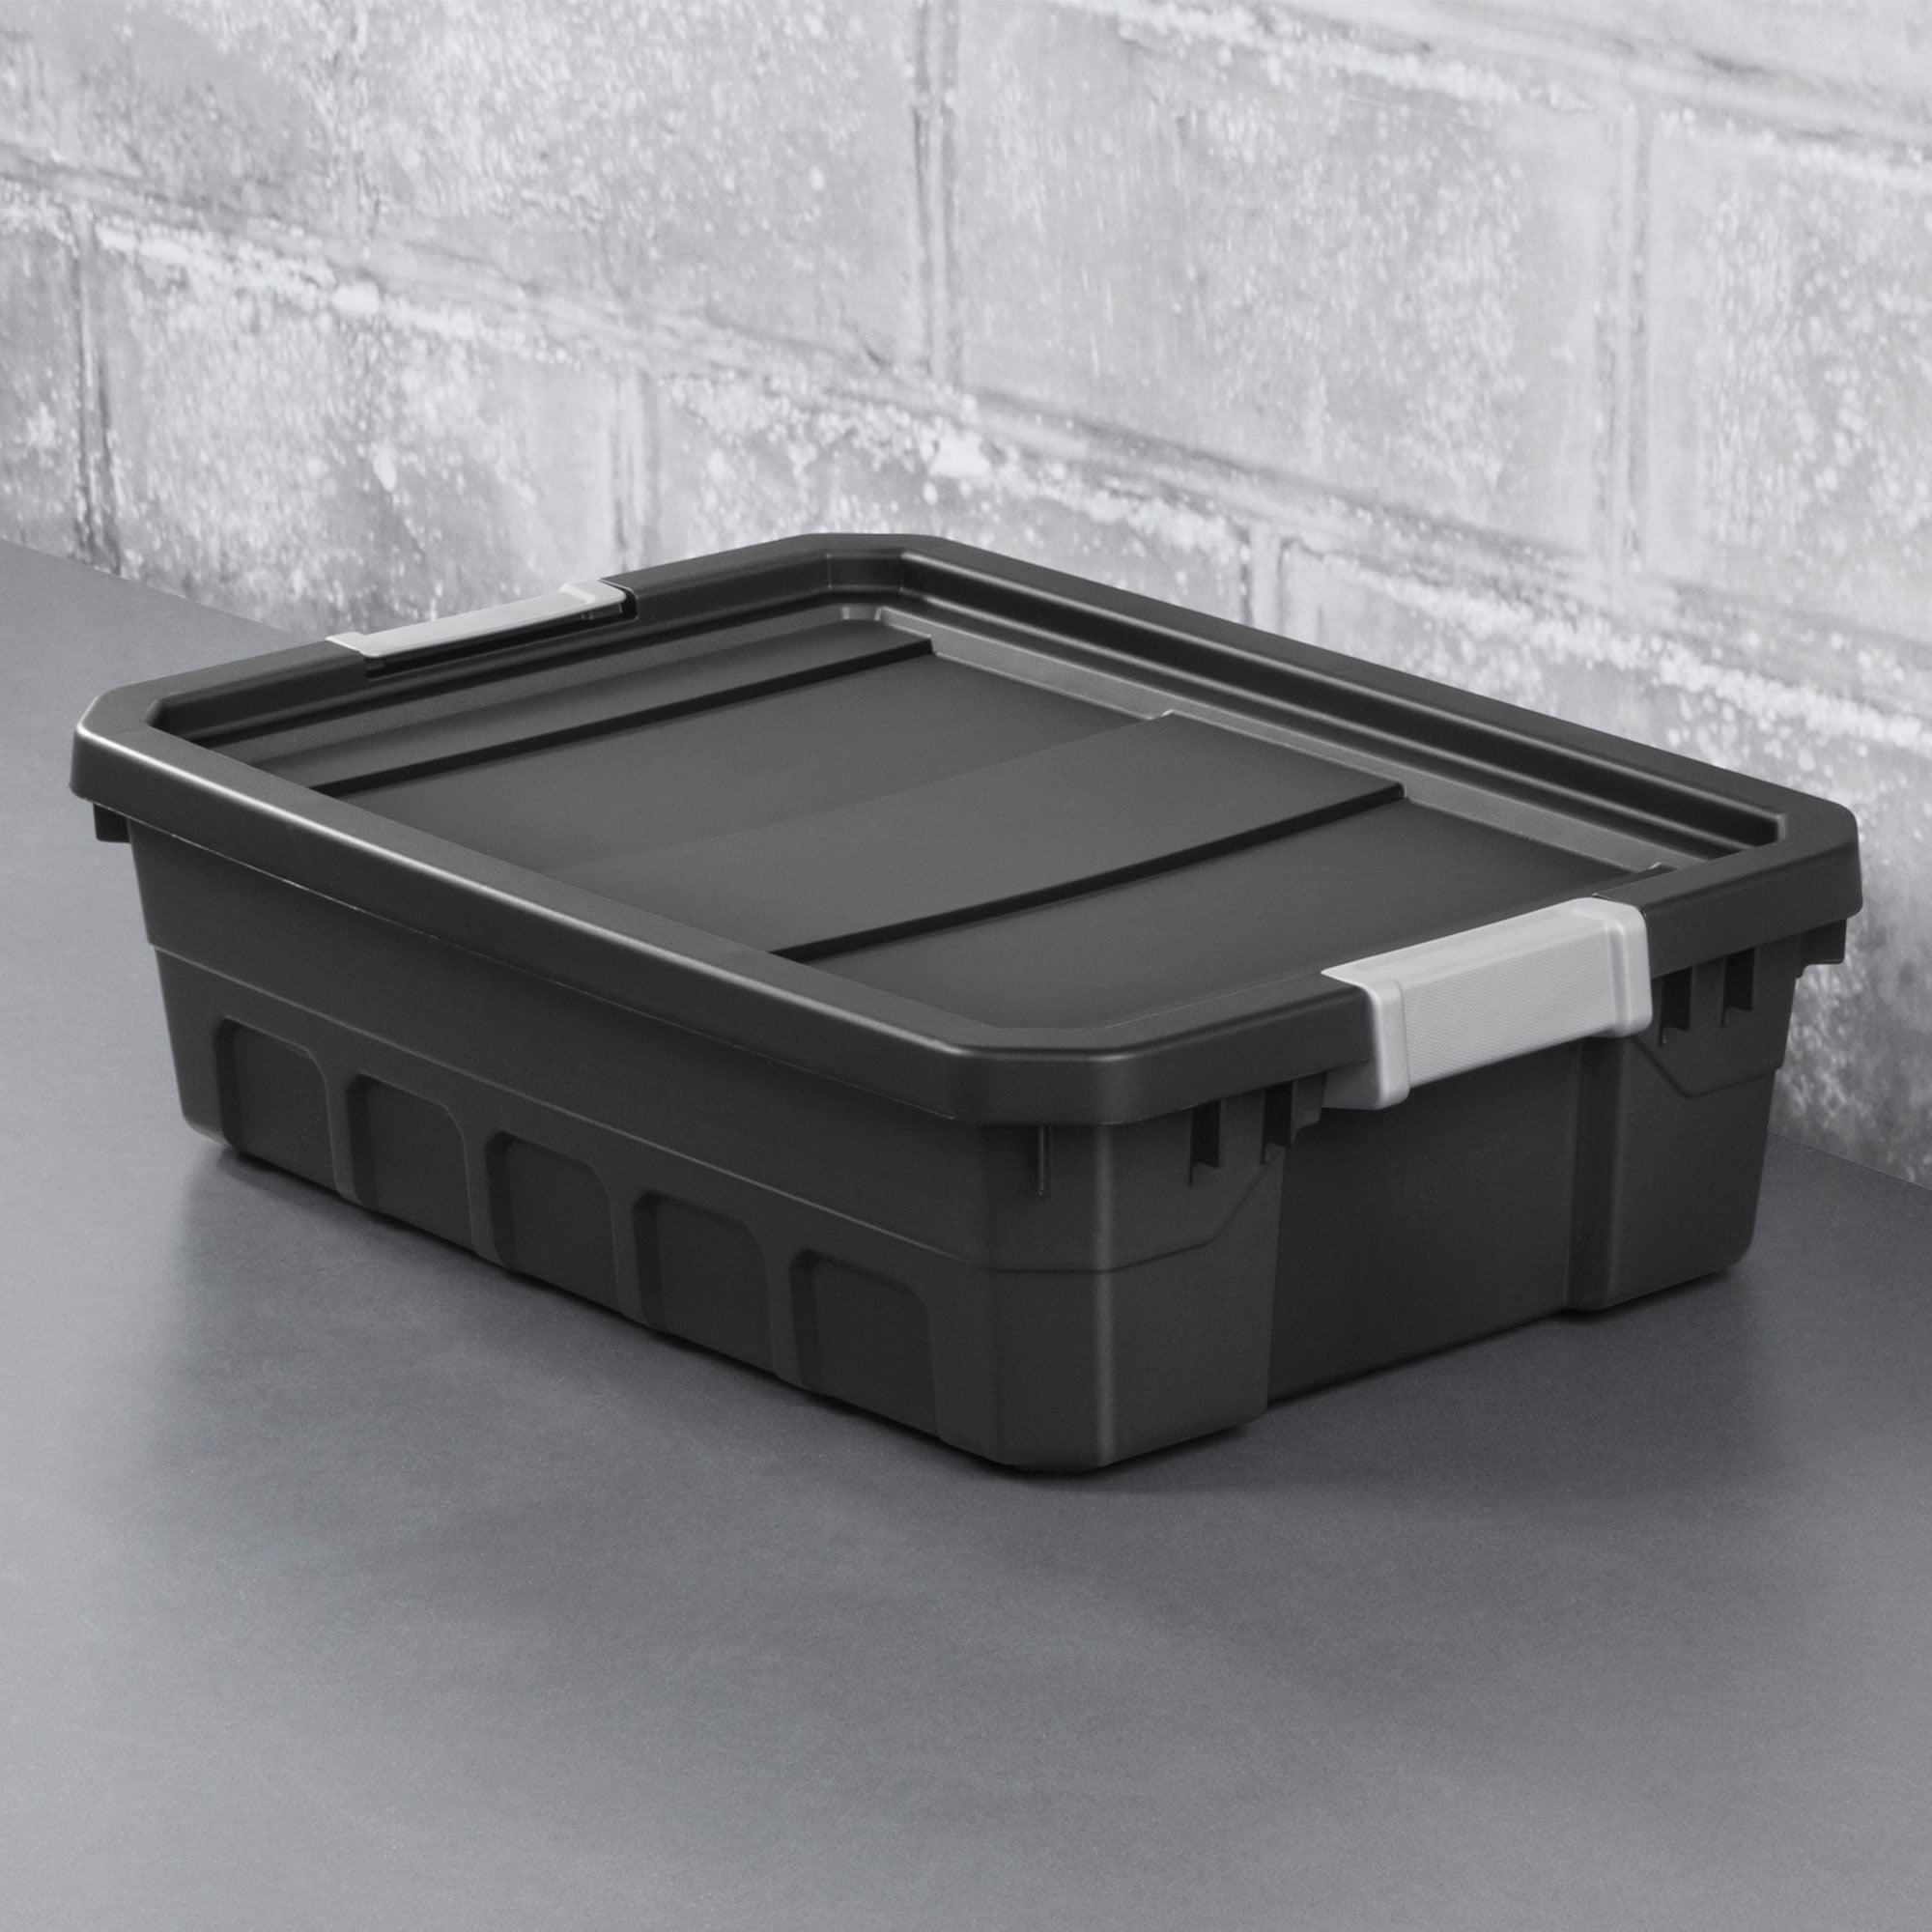 CX CRAFTSMAN, 10-Gallon Highly Durable Storage Bin & Dual Latching Lid,  (12.7”H x 15.7”W x 22.7”D), Versatile Stacking Tote and Weather-Resistant